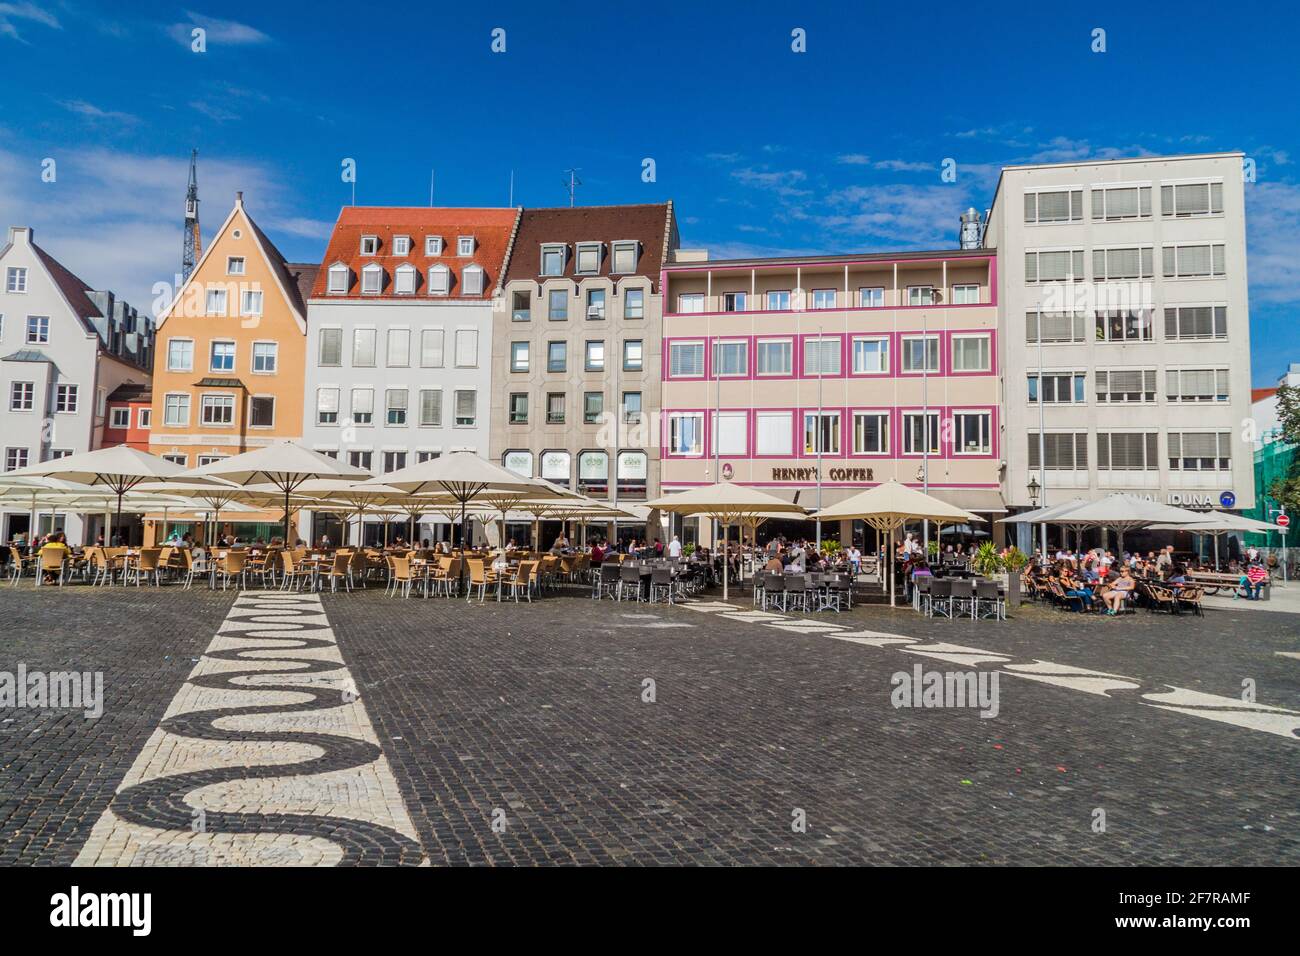 AUGSBURG, GERMANY - SEPTEMBER 16, 2016: View of Rathausplatz Town hall square in Augsburg Stock Photo